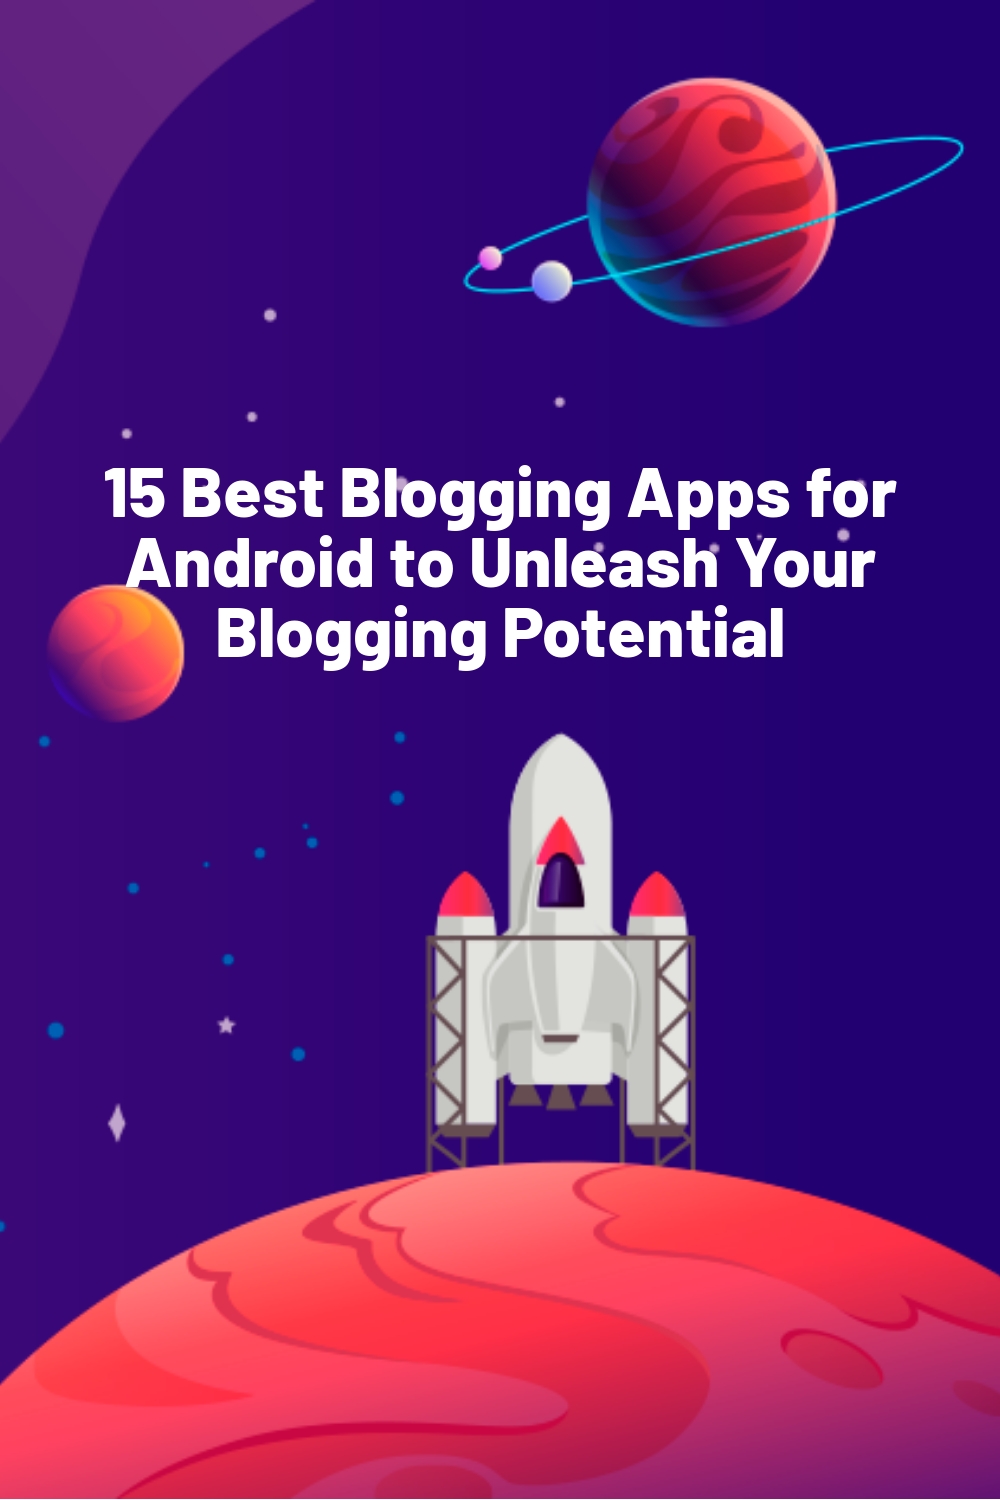 15 Best Blogging Apps for Android to Unleash Your Blogging Potential